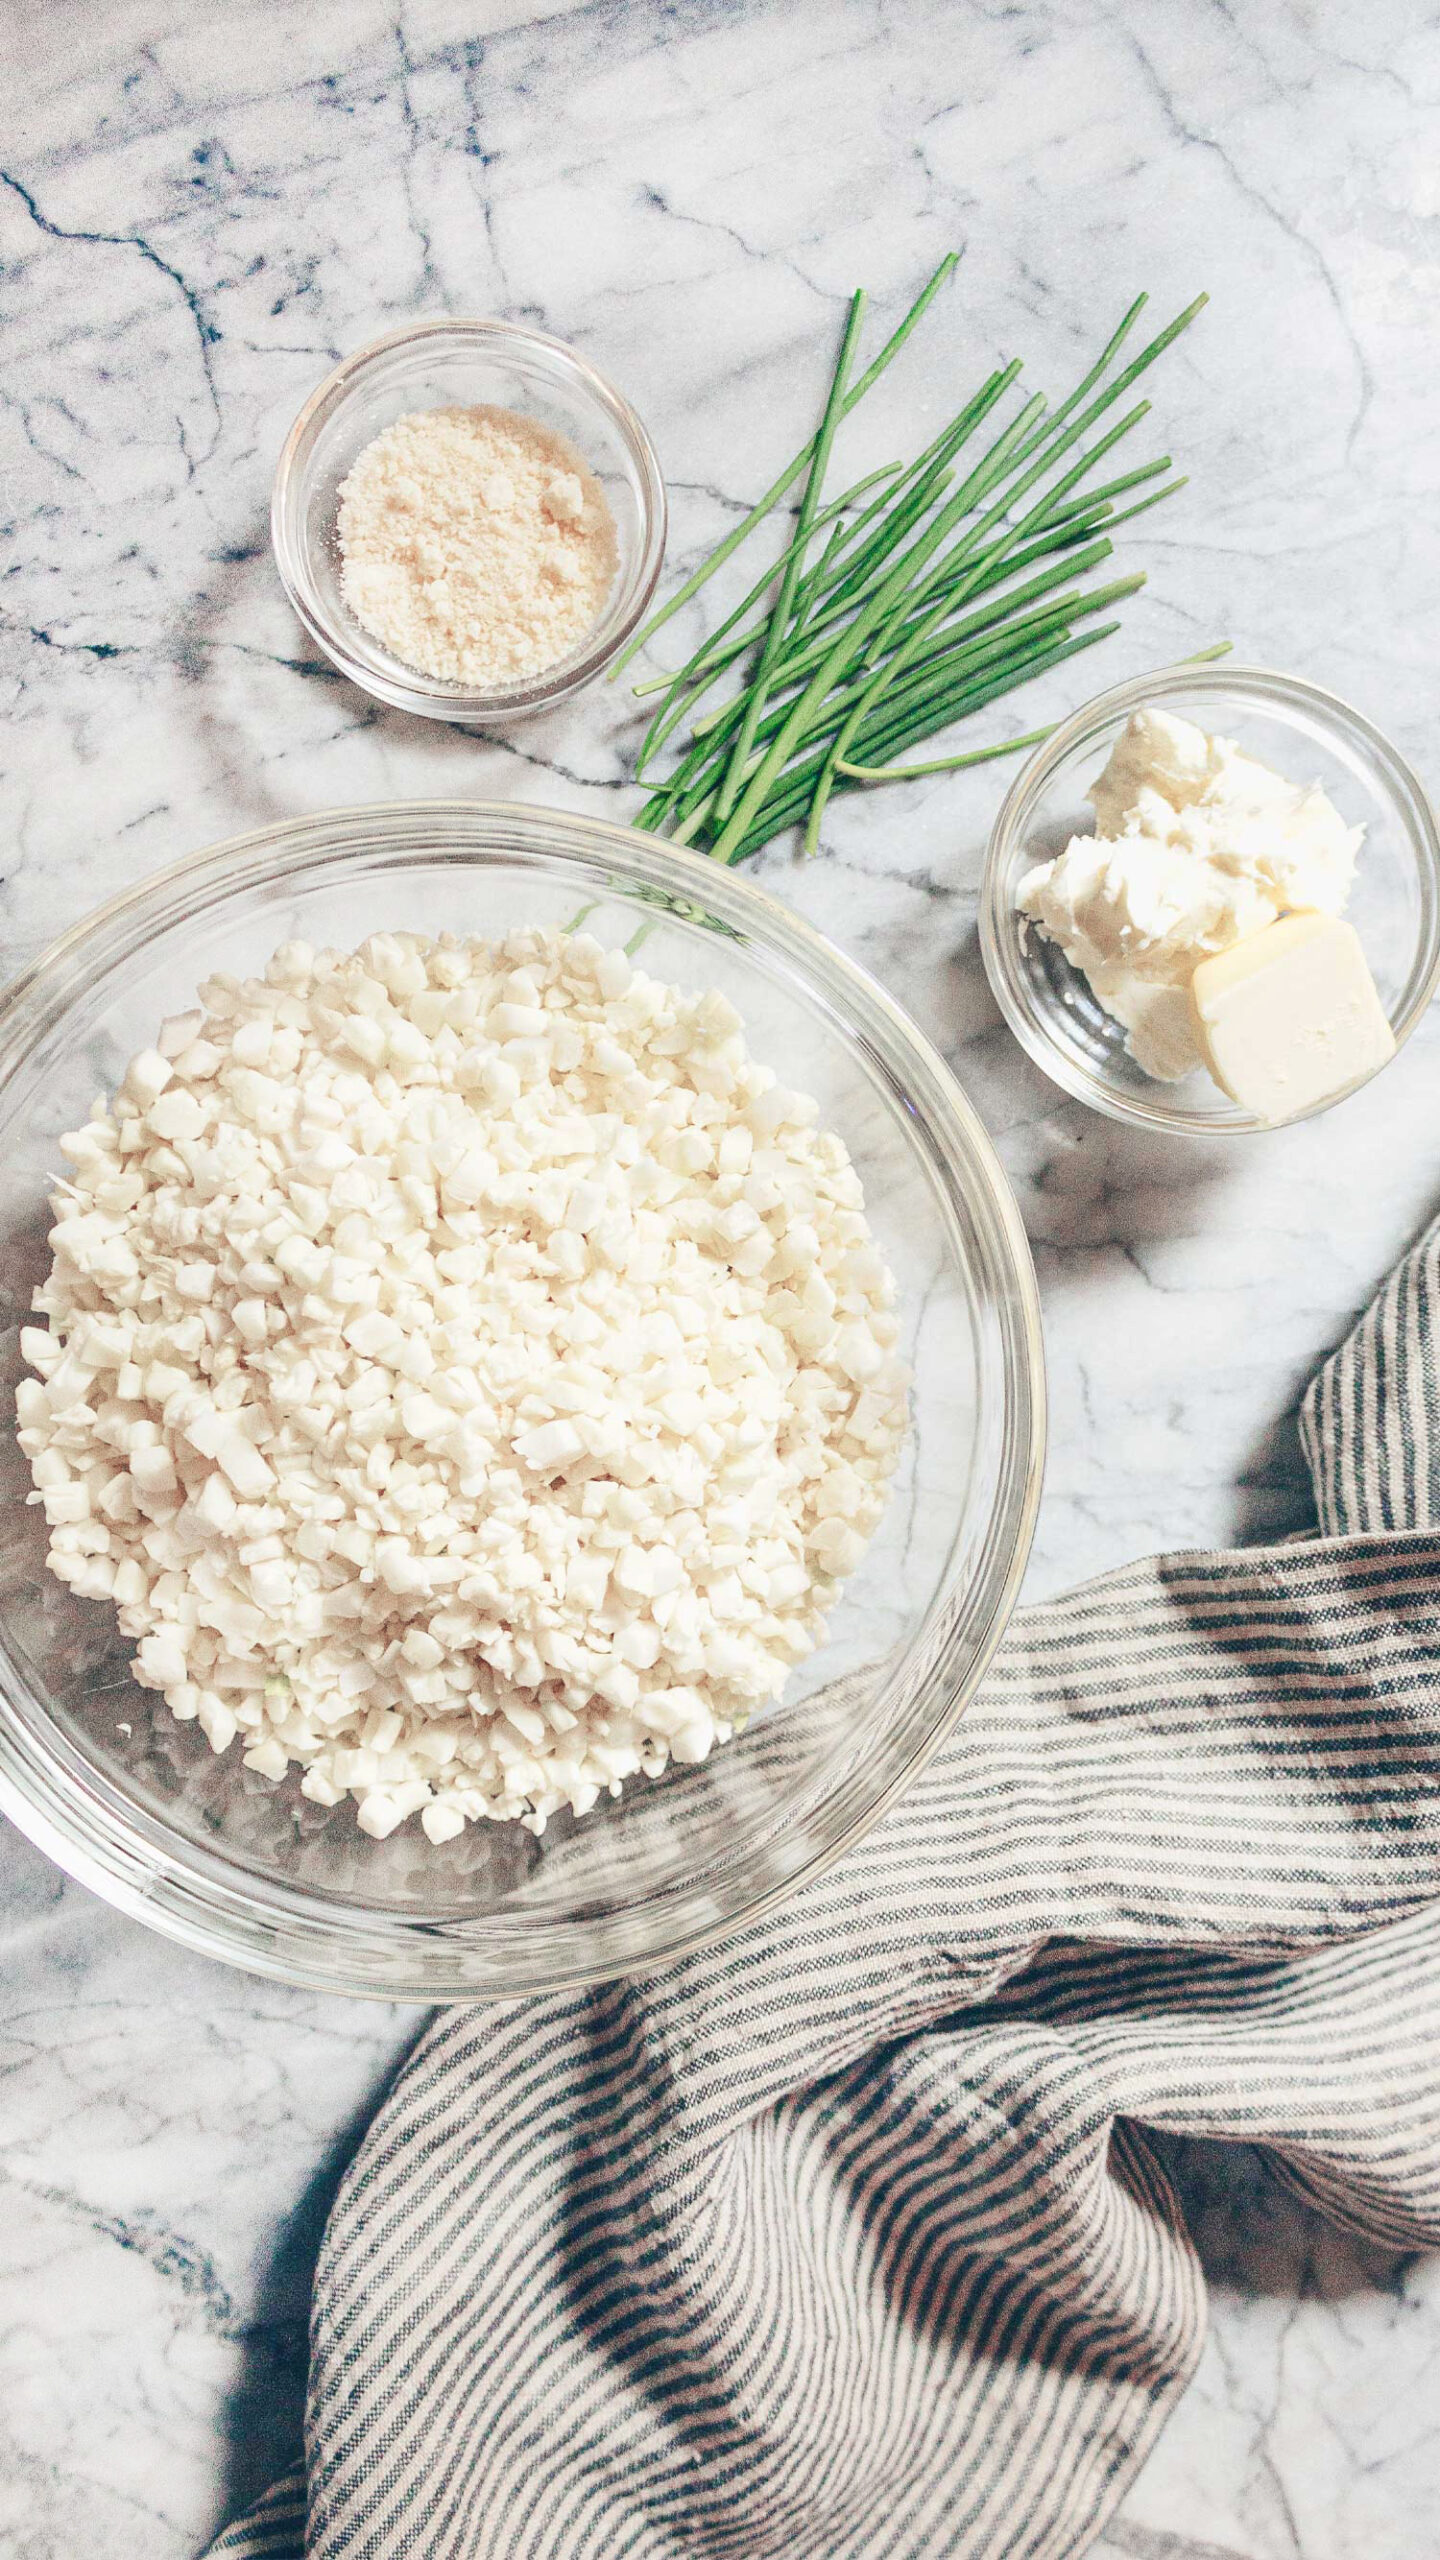 The ingredients for Whipped Cauliflower With Mascarpone displayed in bowls on a marble slab: riced cauliflower, mascarpone, butter, parmesan cheese. 